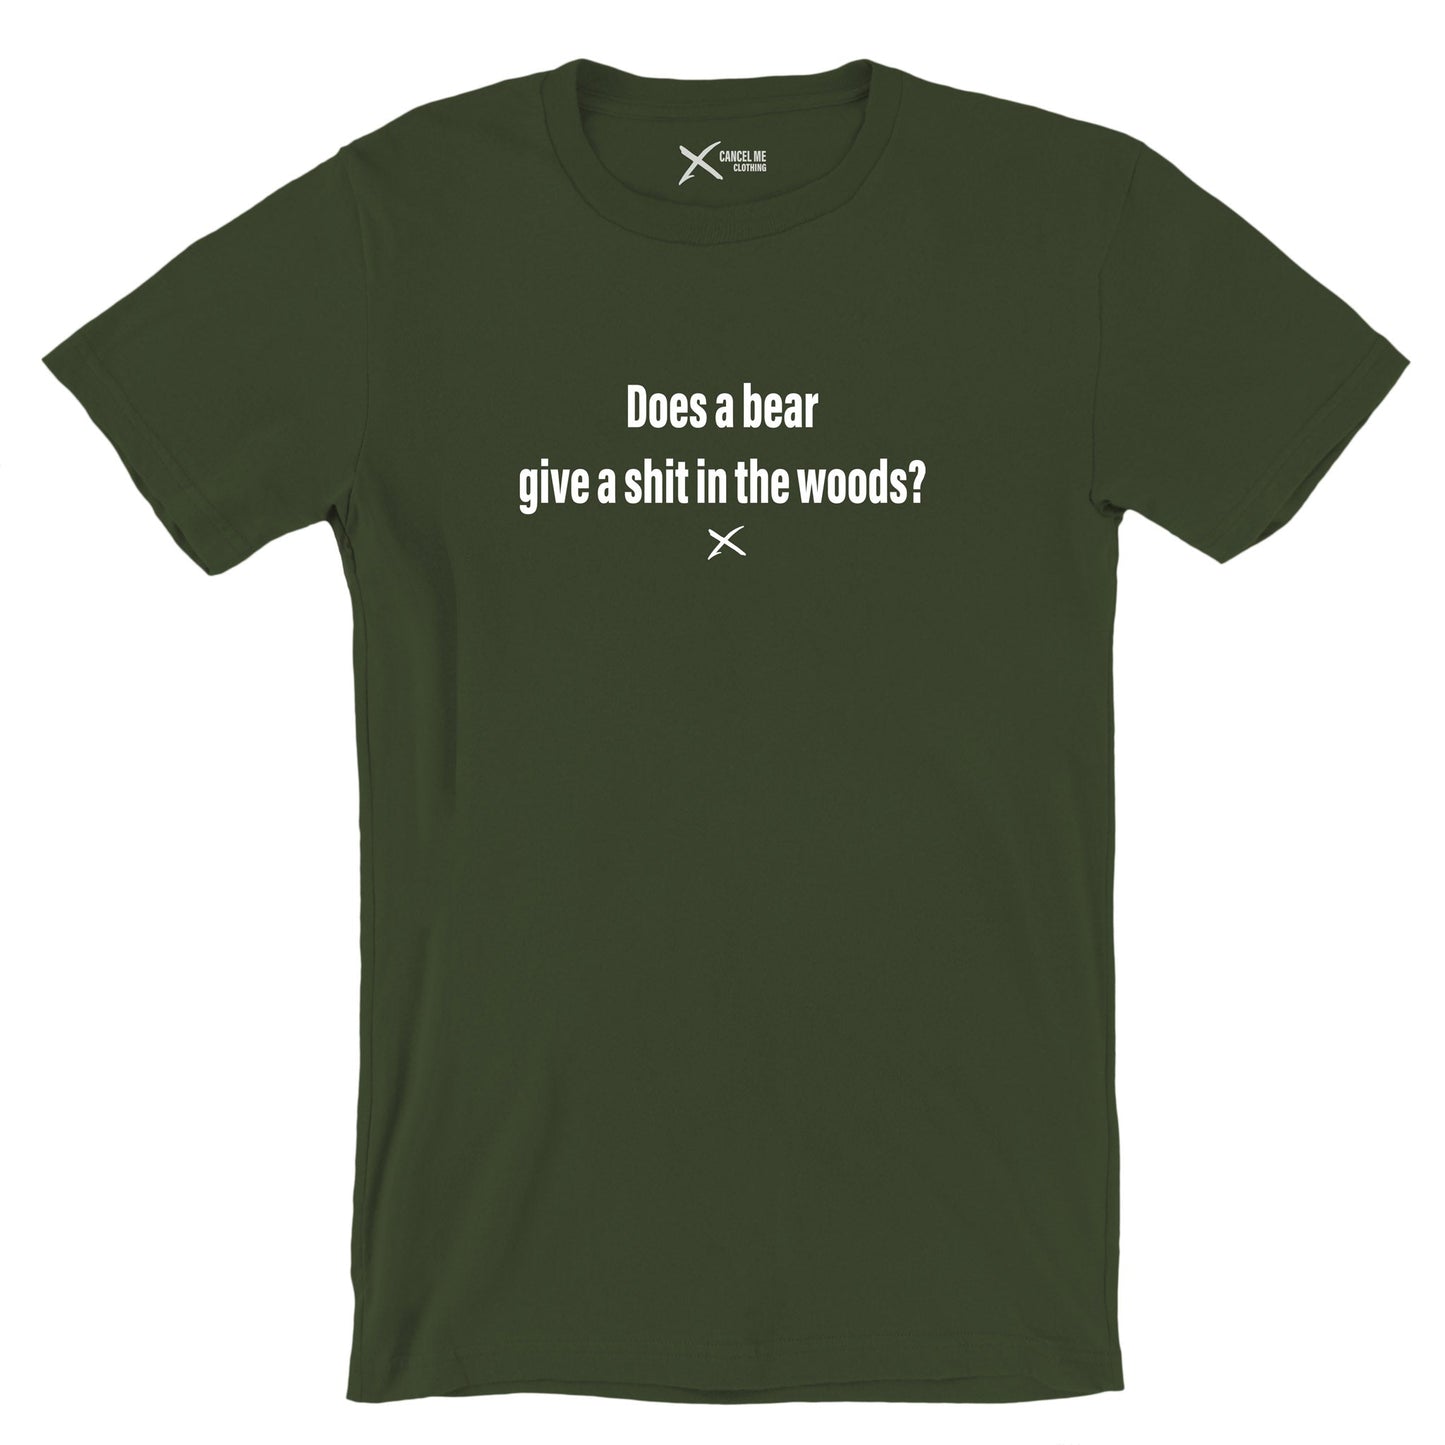 Does a bear give a shit in the woods? - Shirt